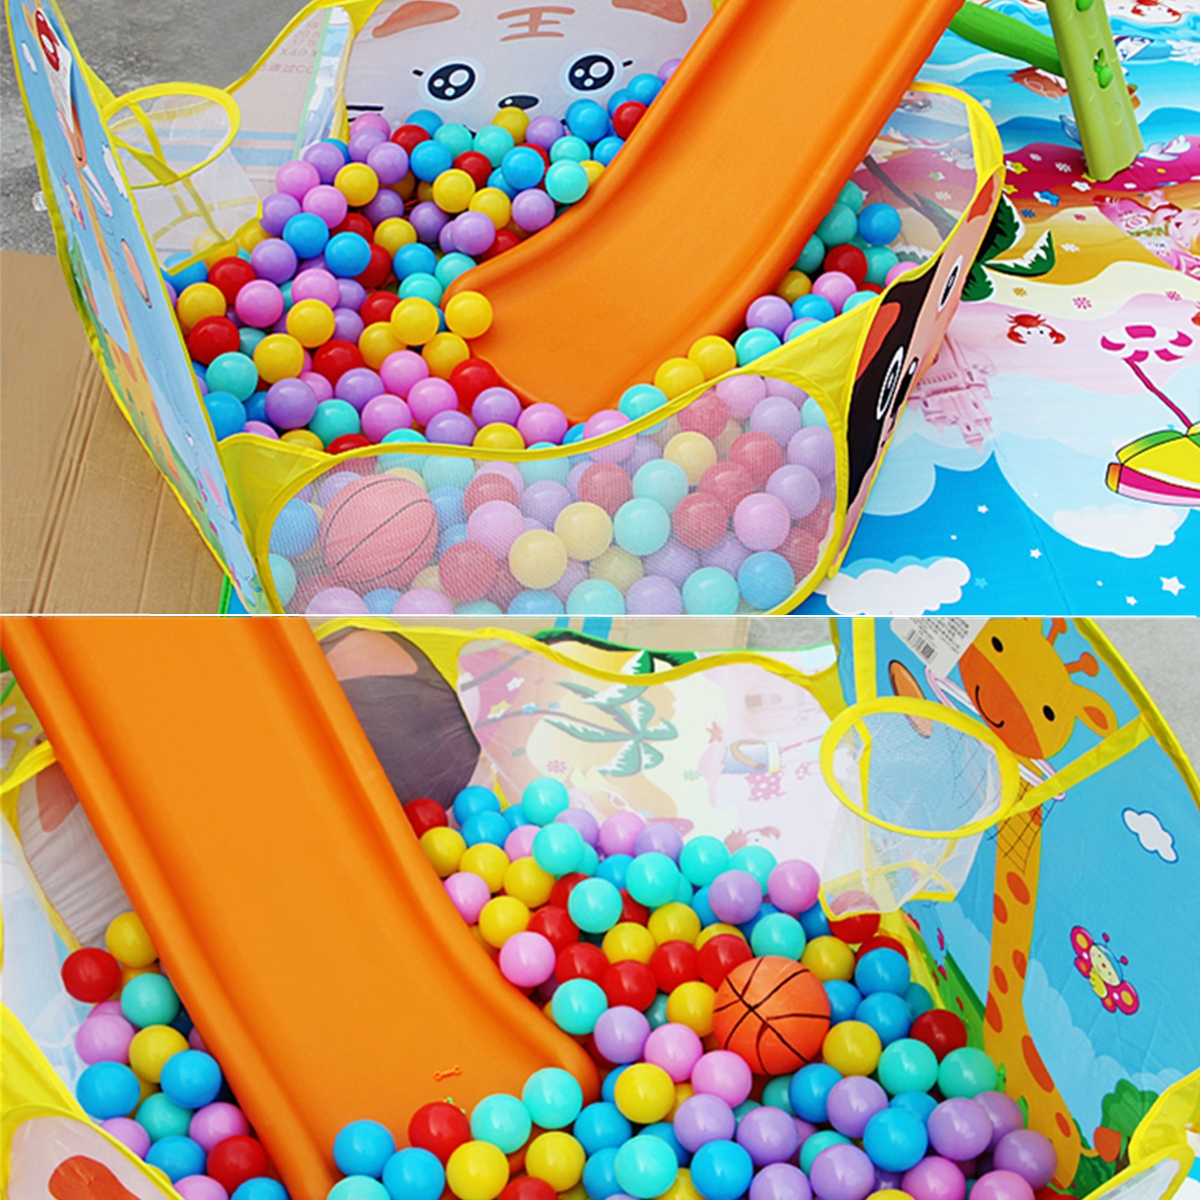 120CM-Foldable-Children-Kids-Ocean-Ball-Pool-Toy-Play-Tent-For-Indoor-Outdoor-Game-1256366